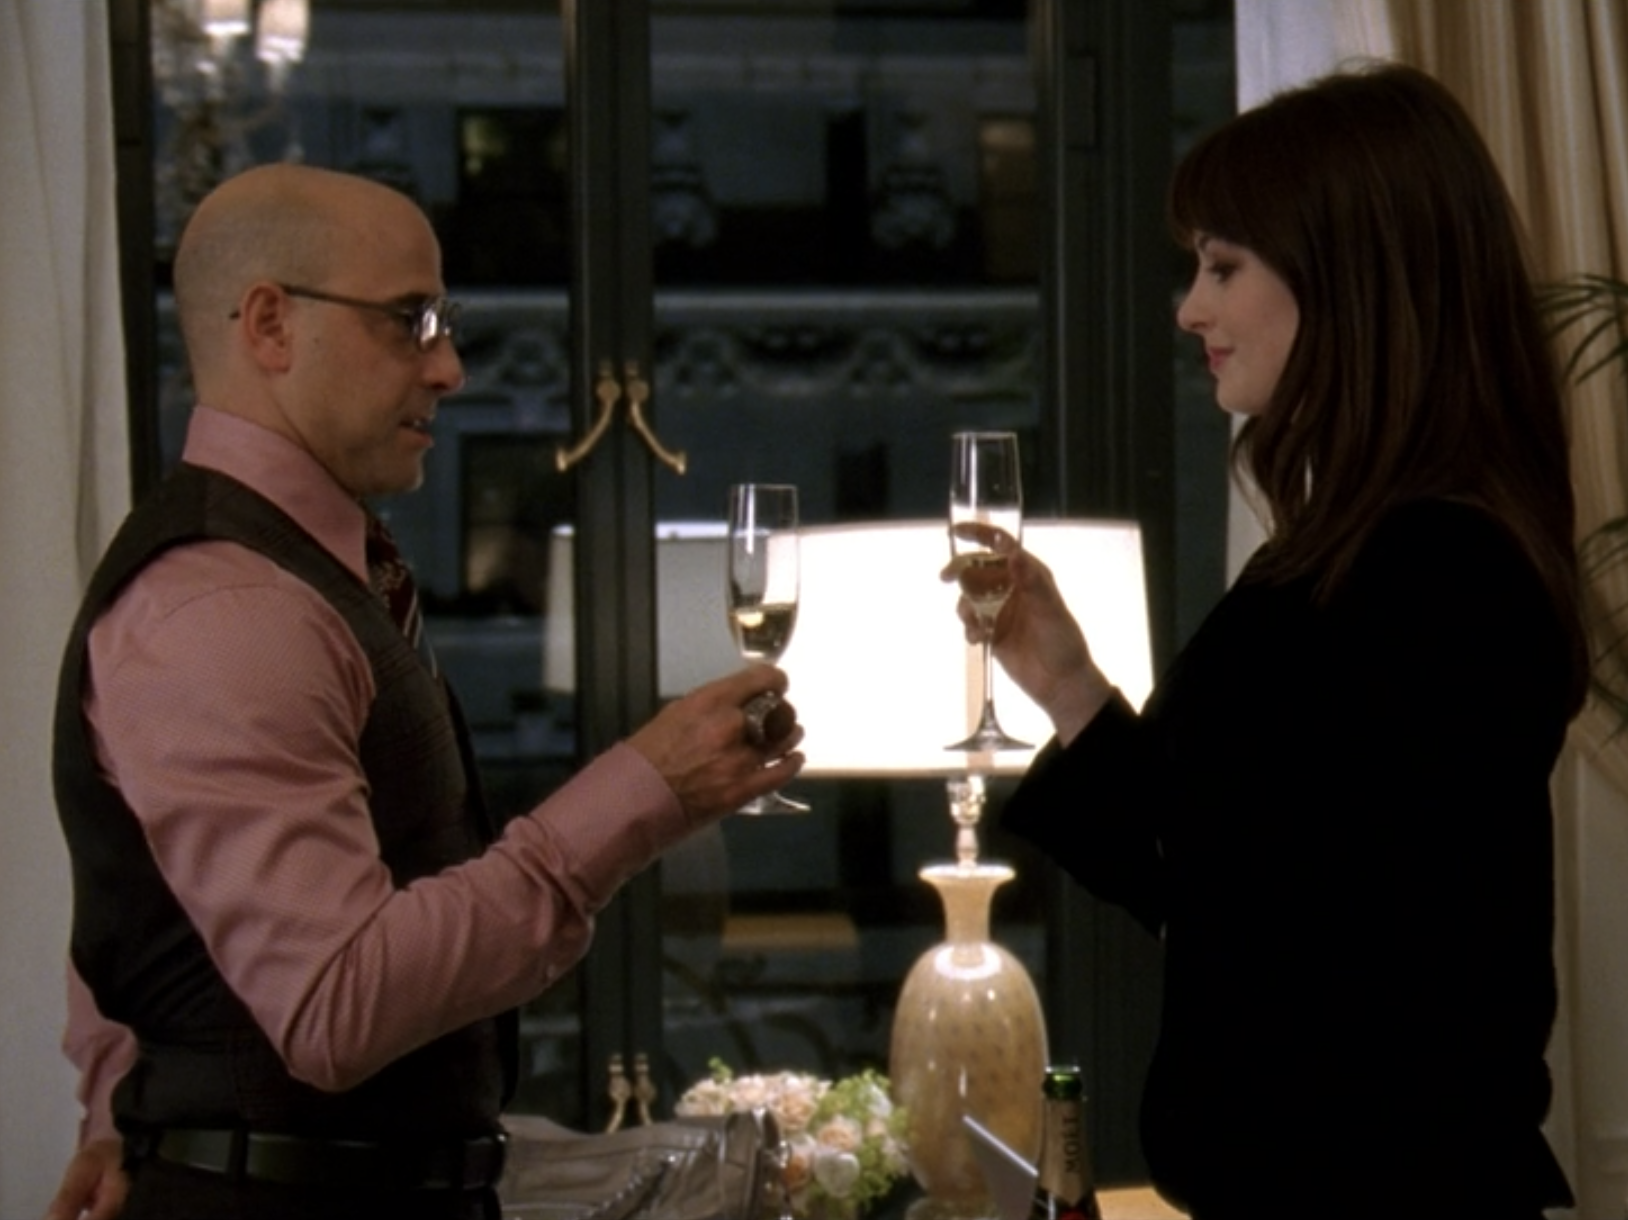 Stanley Tucci and Anne Hathaway toasting in "The Devil Wears Prada."